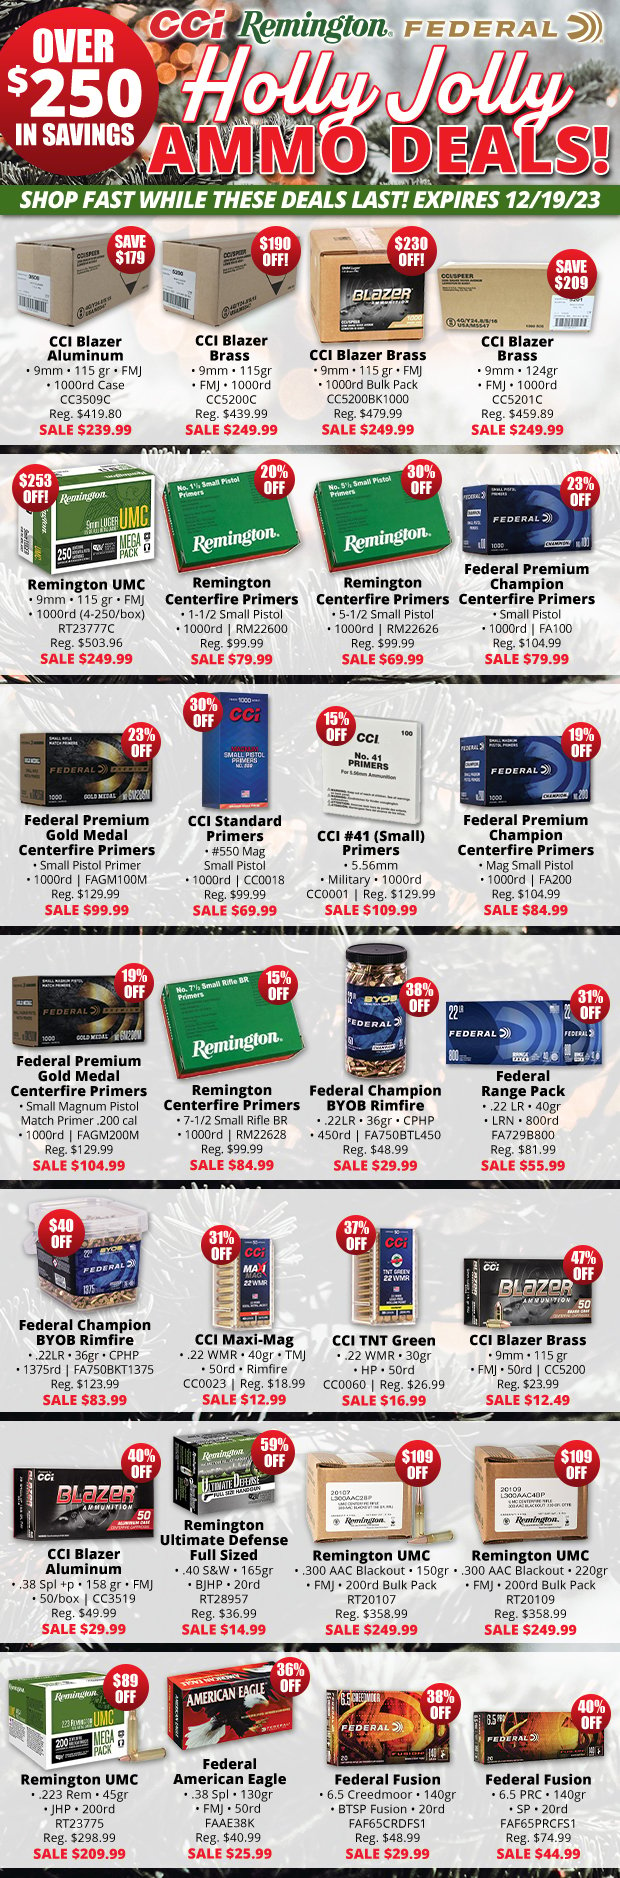 Holly Jolly Ammo Deals with Over $250 in Savings!